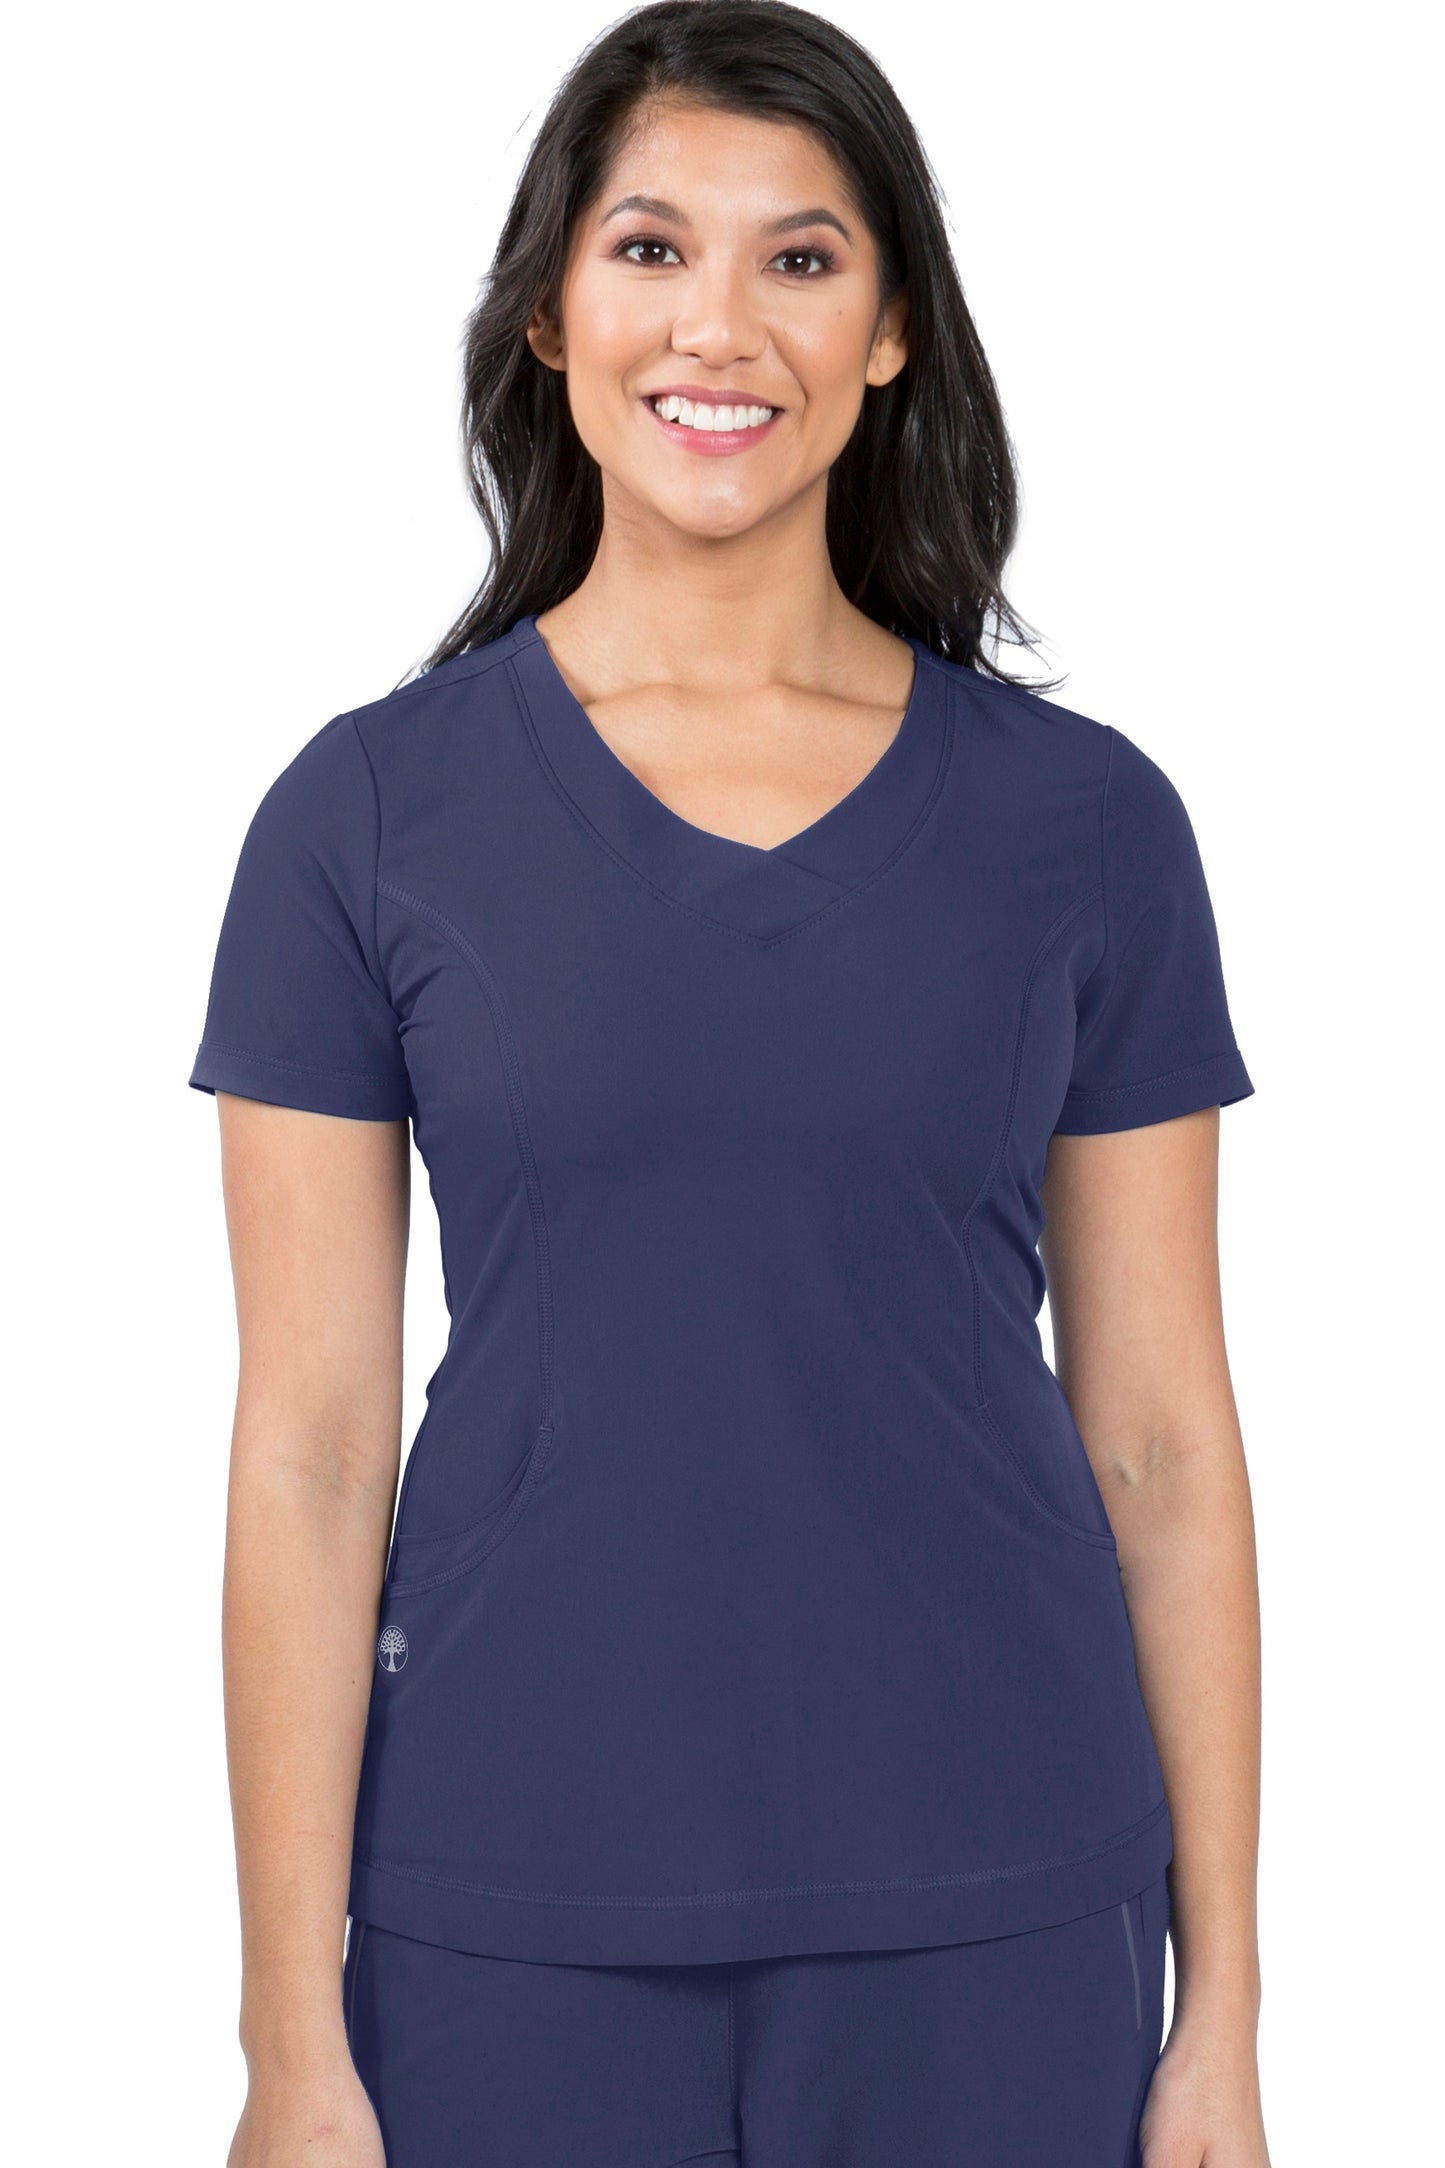 Healing Hands HH360 Sloan Scrub Top in Navy at Parker's Clothing and Shoes.